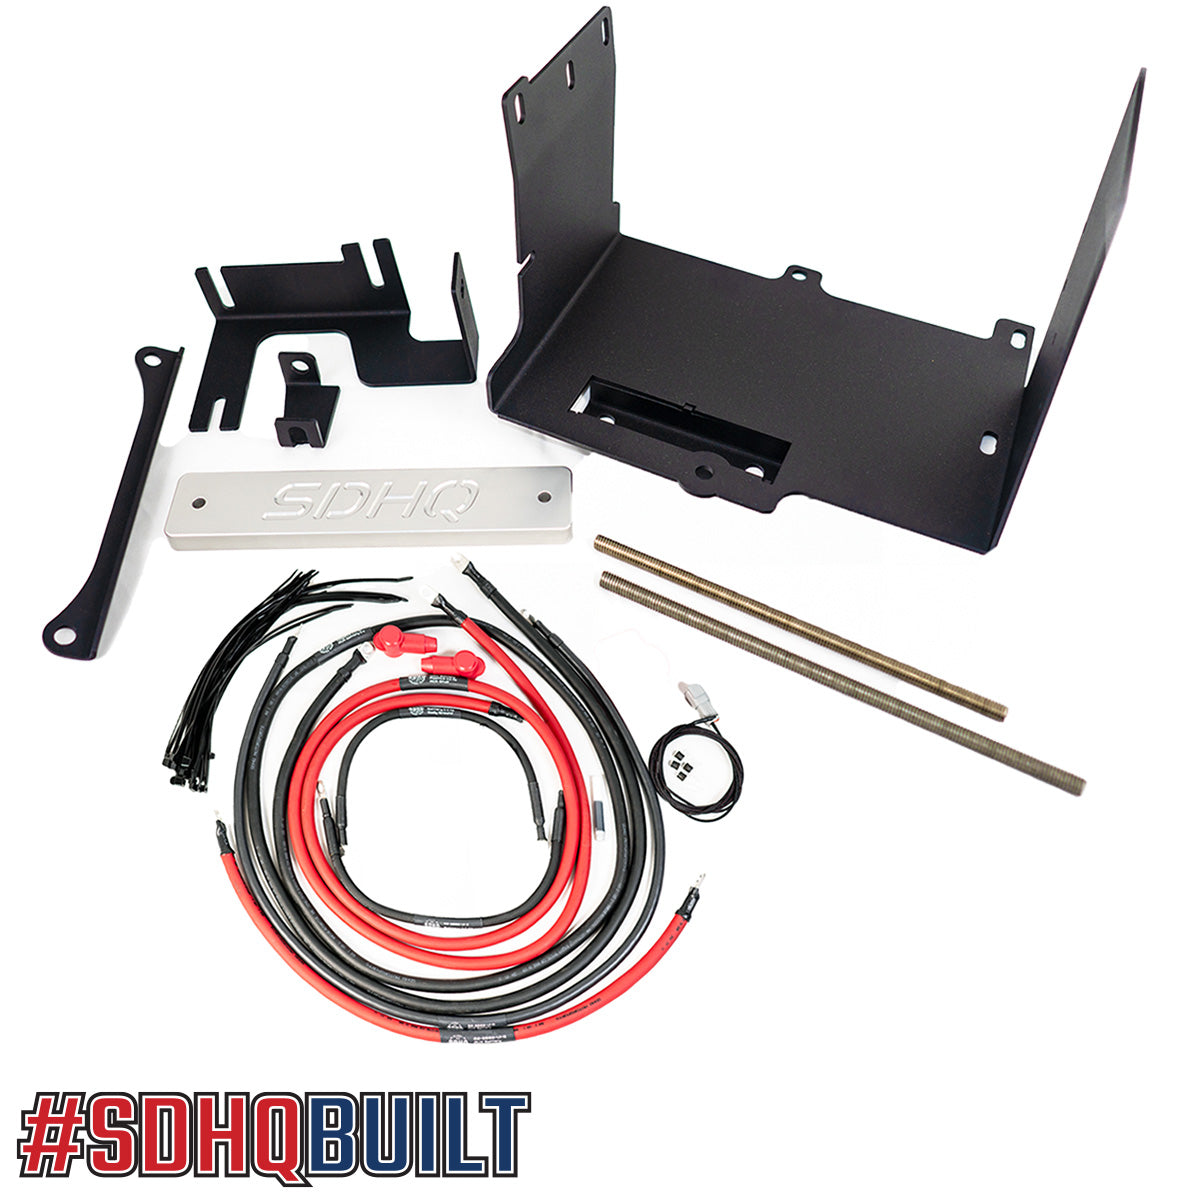 '16-Current Toyota Tacoma SDHQ Built "Build your Own" Dual Battery Kit